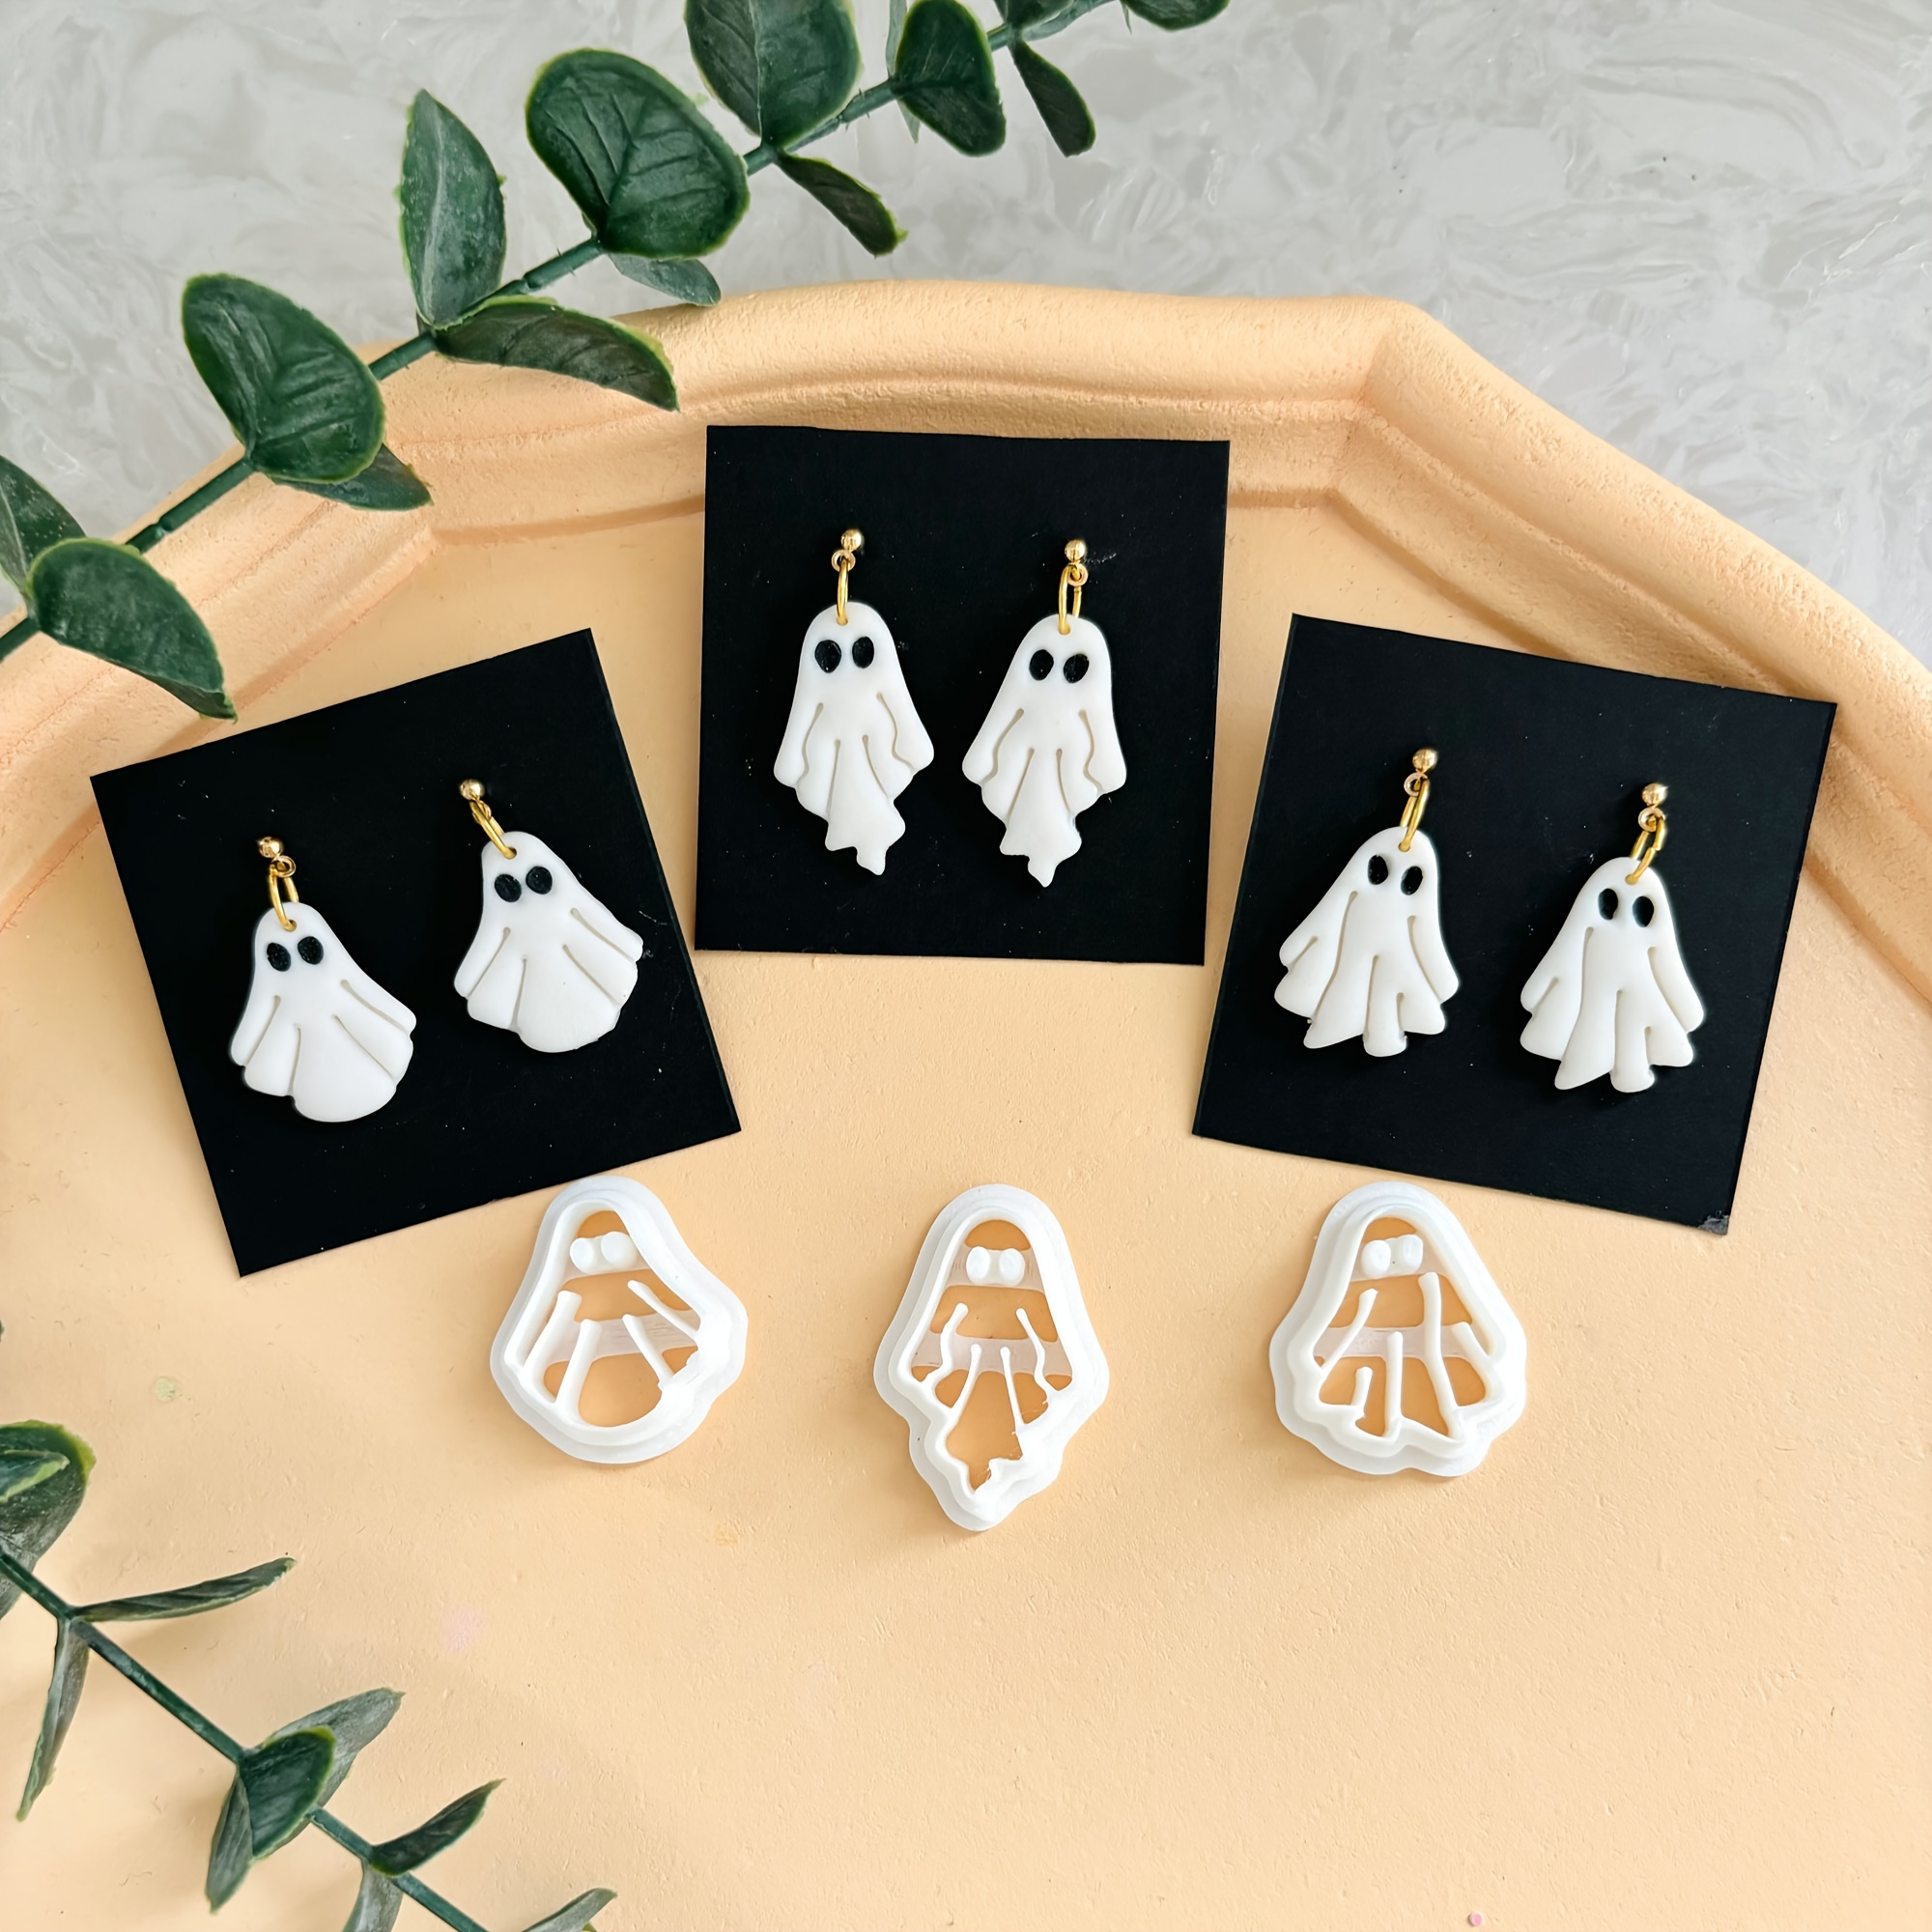 

Halloween Ghost Earring Cutting Dies Set Of 3, Polyresin Clay Cutter Molds For Jewelry Making, Autumn Clay Earring Cutters, Polymer Clay Craft Tools With Halloween Theme - No Power Required